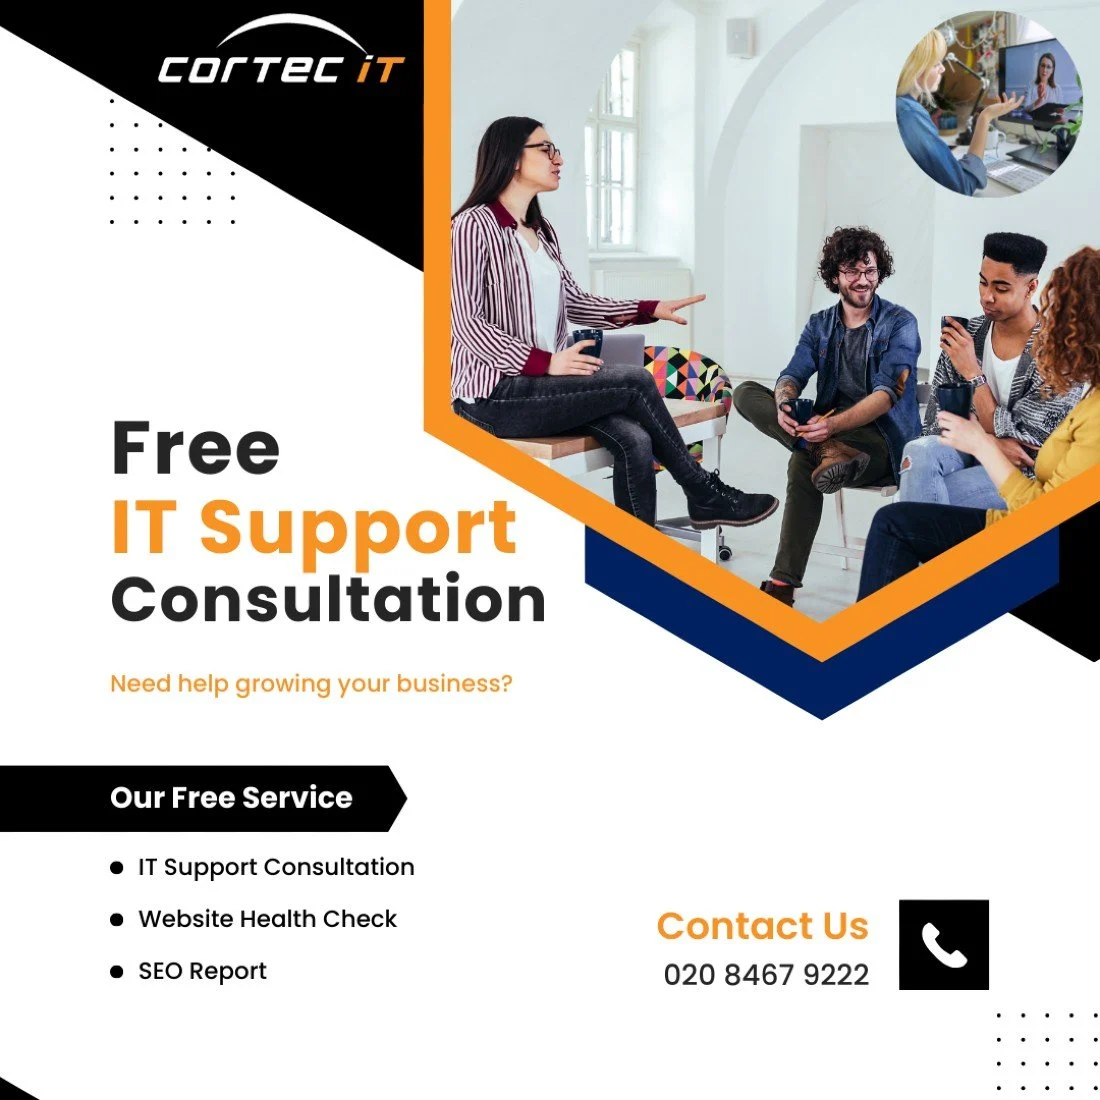 Free IT Support Consultation in the UK